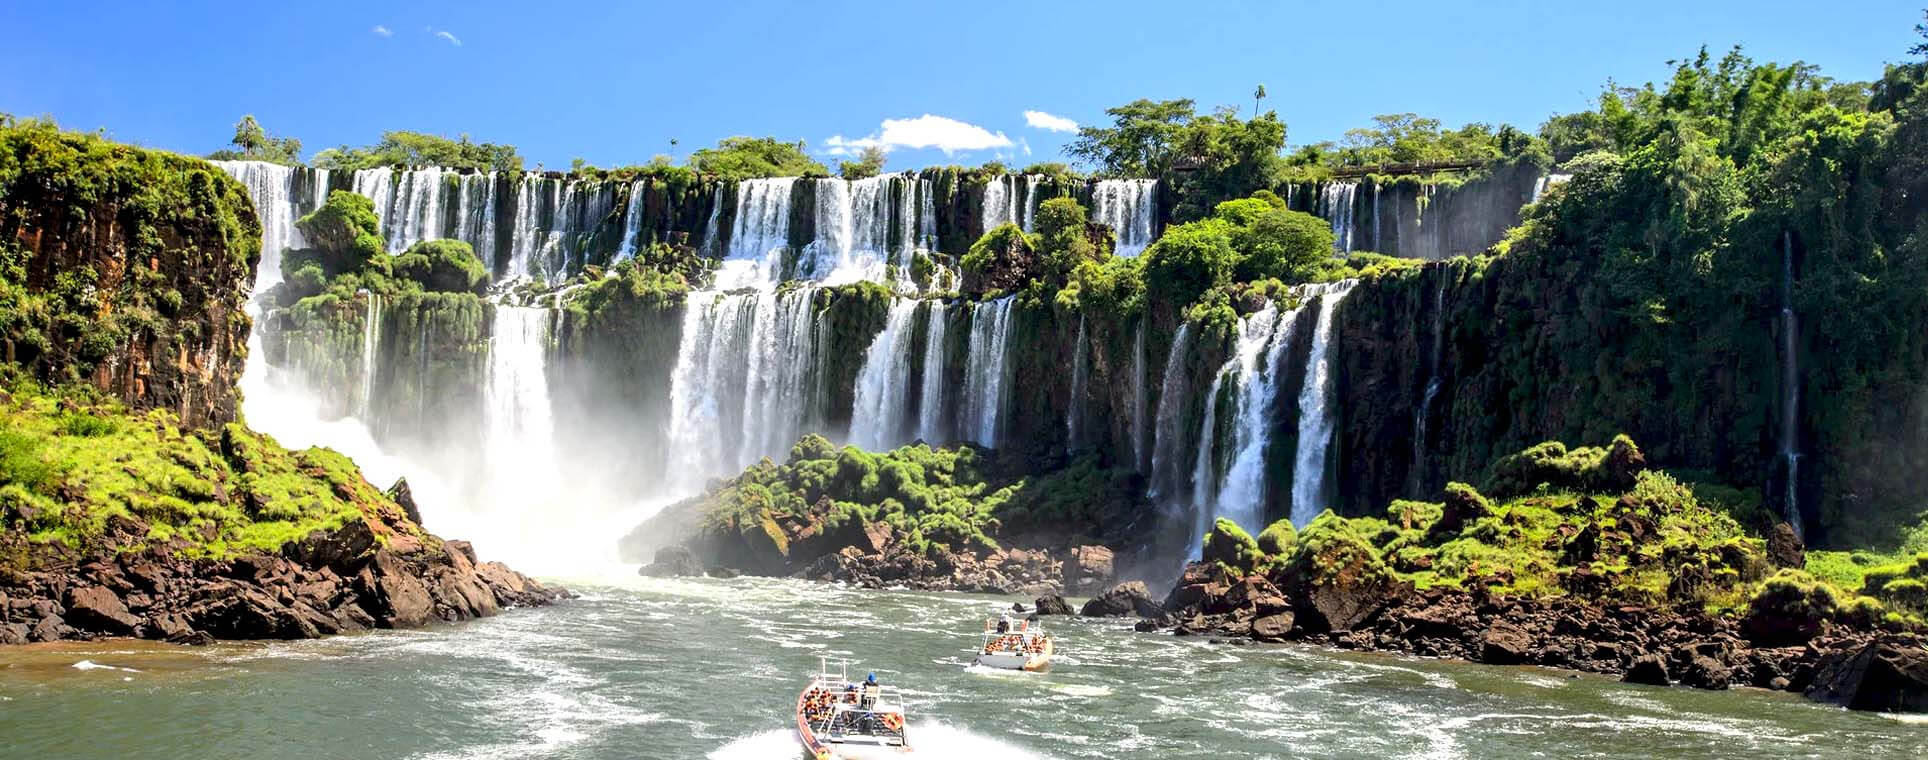 Paraguay Tourist Attractions